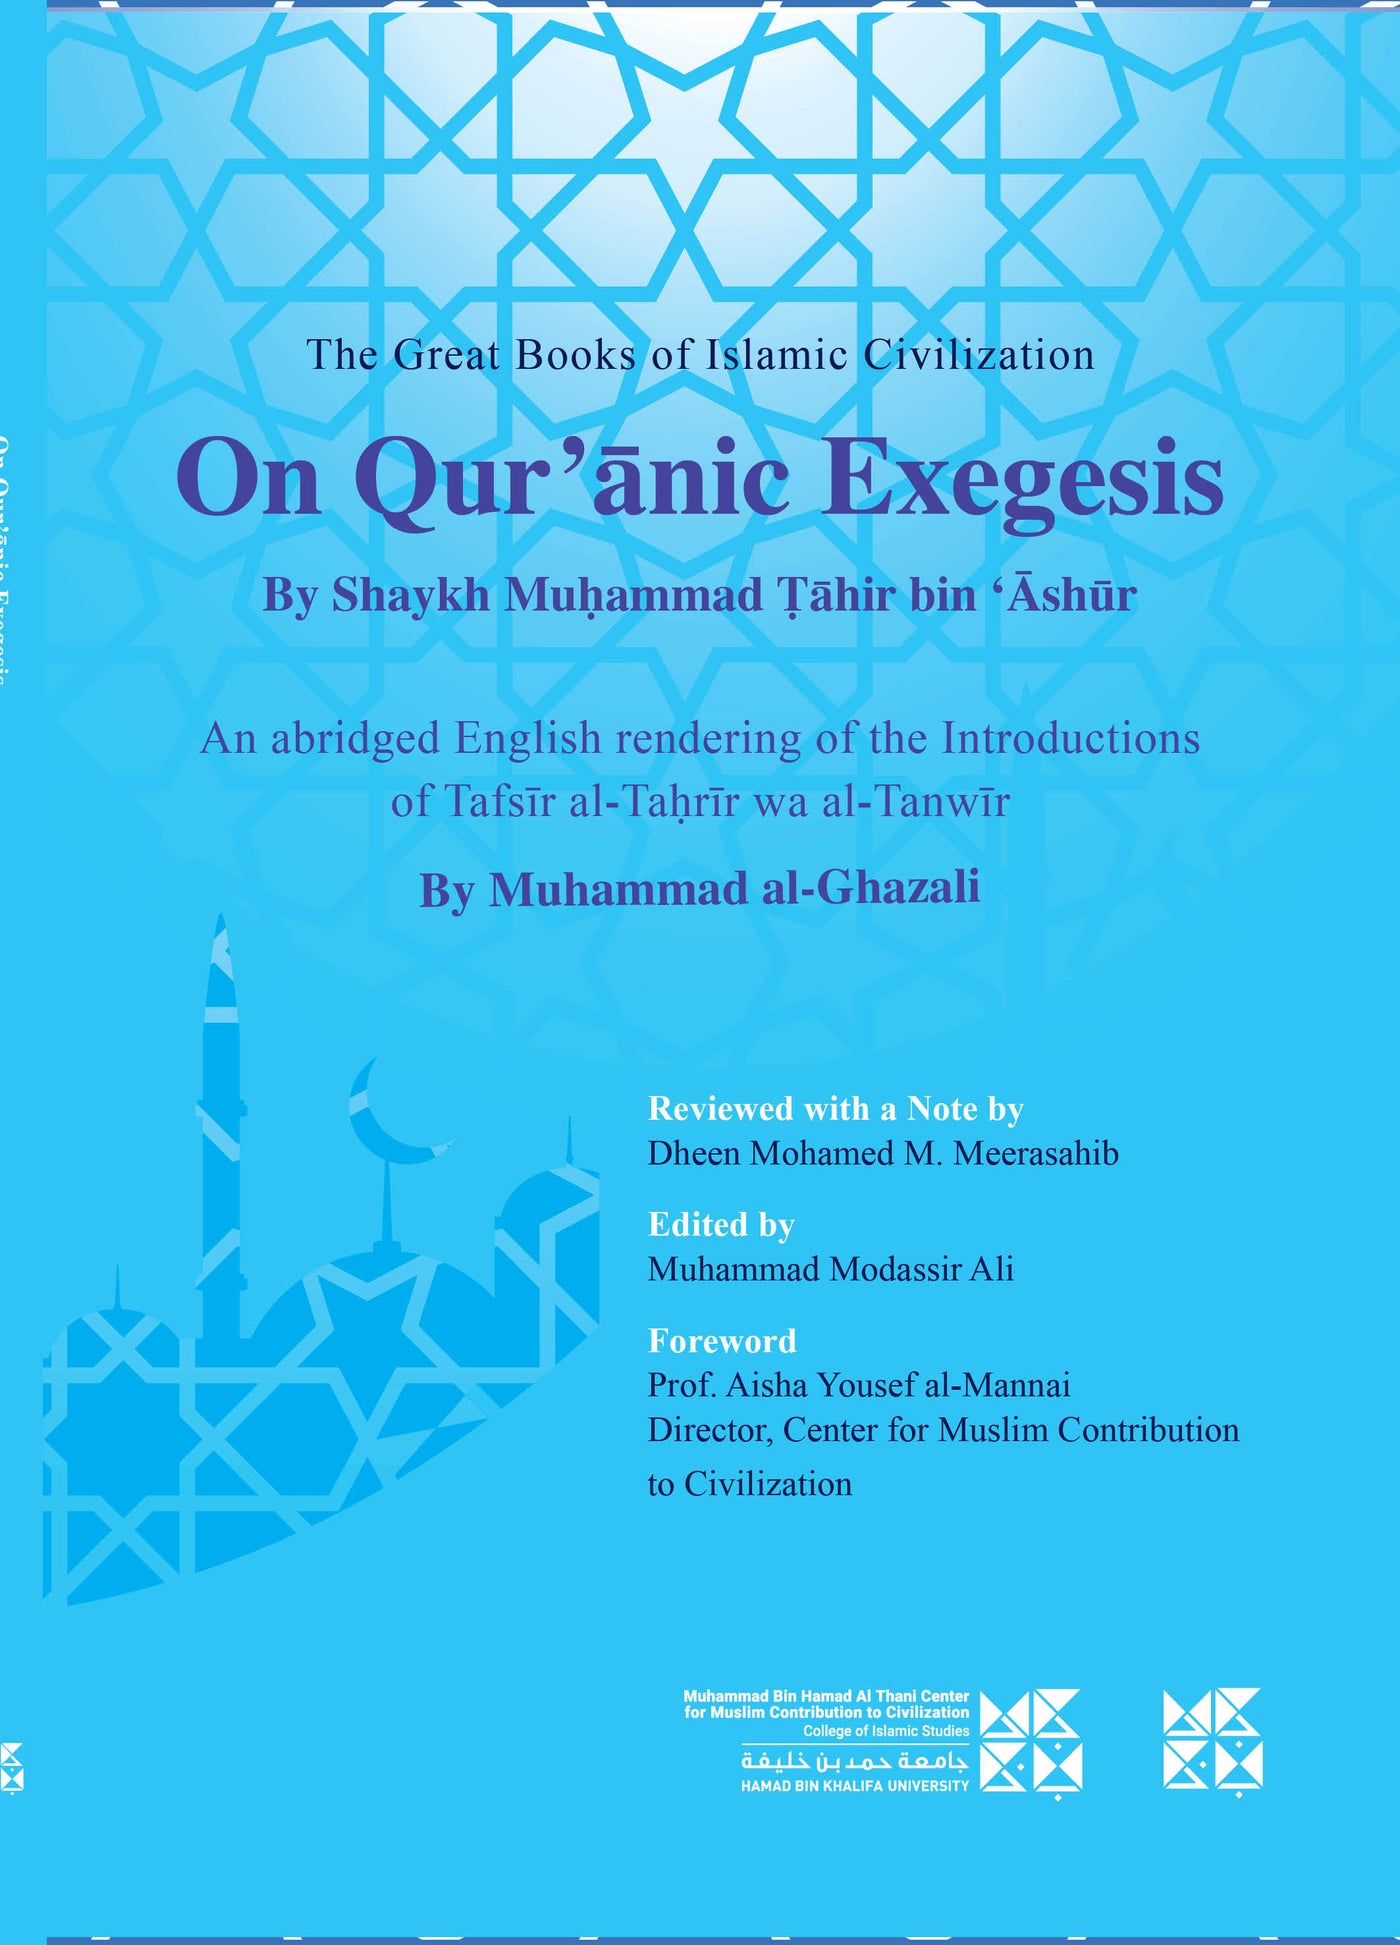 On Qur'anic Exegesis - Ibn Ashur's Insights